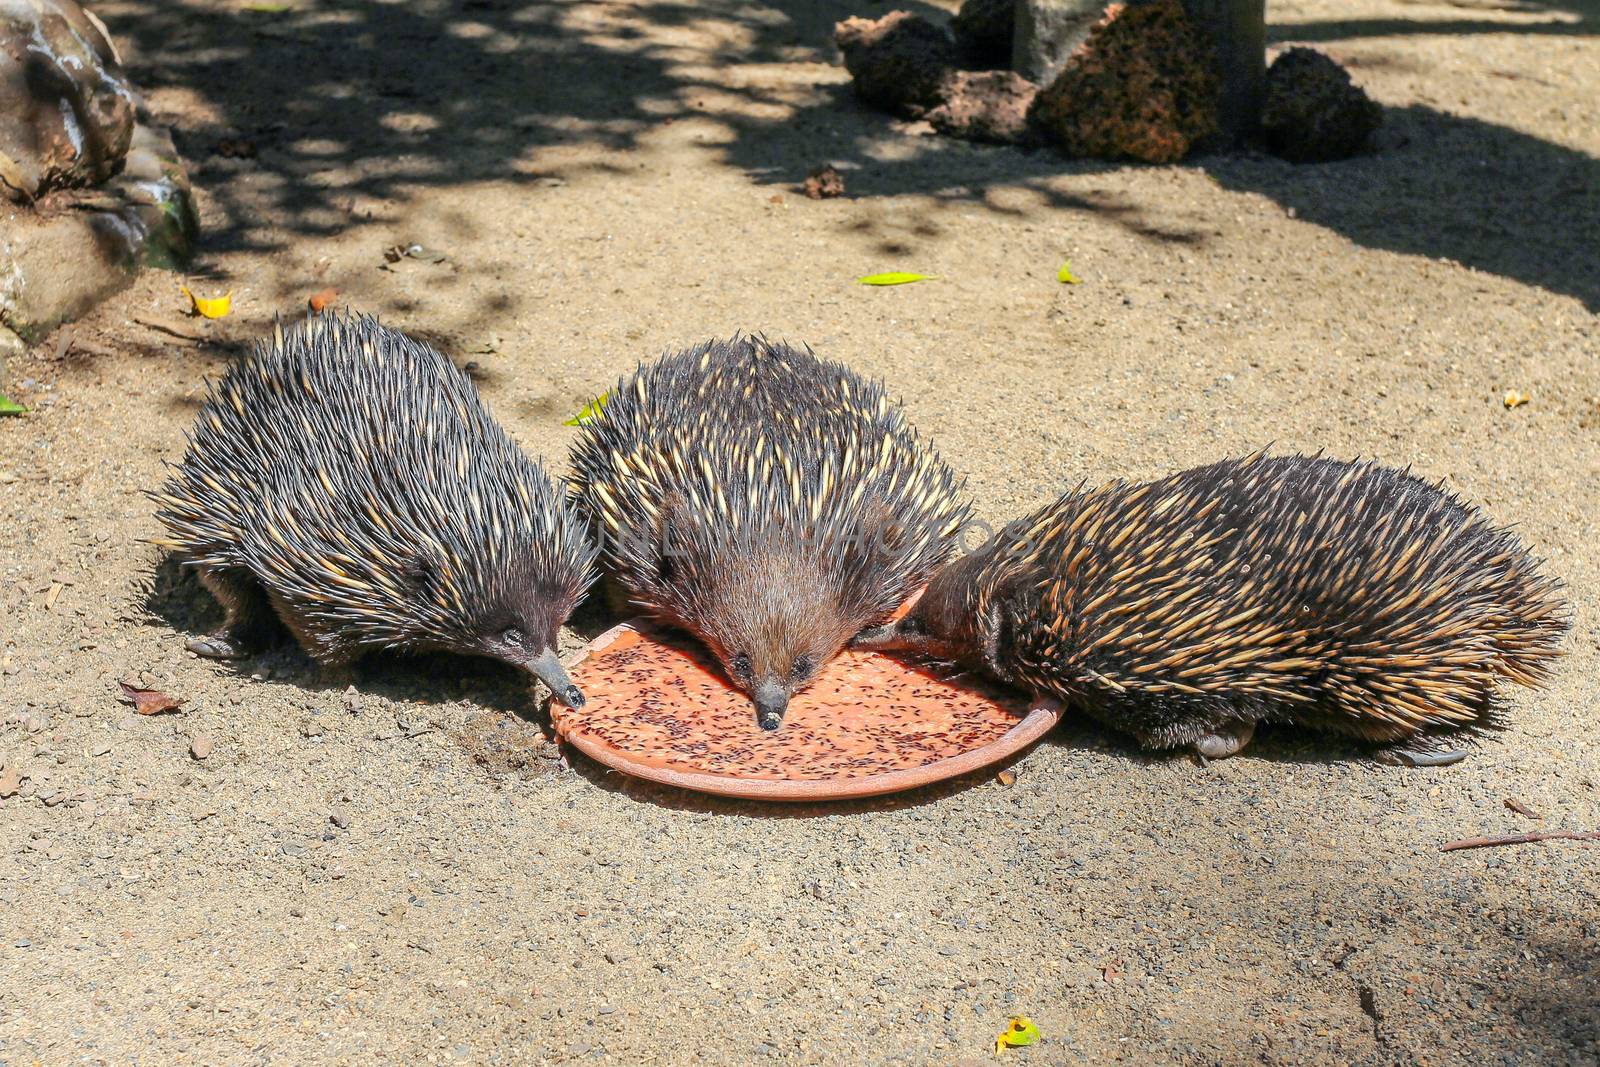 Three echidnas eating from one plate, Sydney, Australia